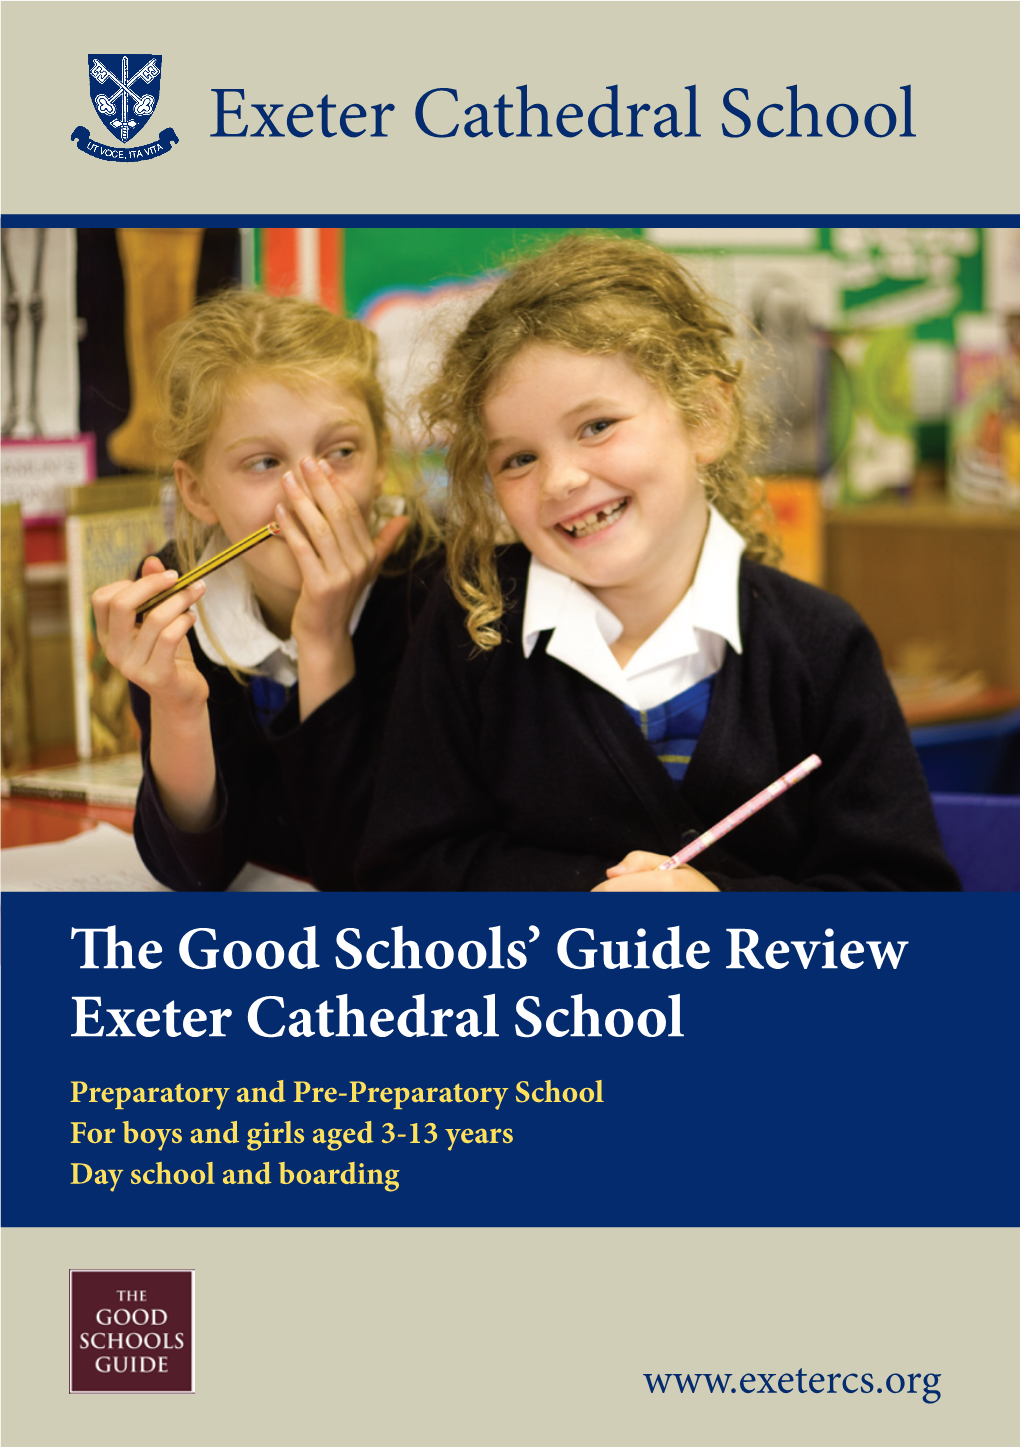 Exeter Cathedral School